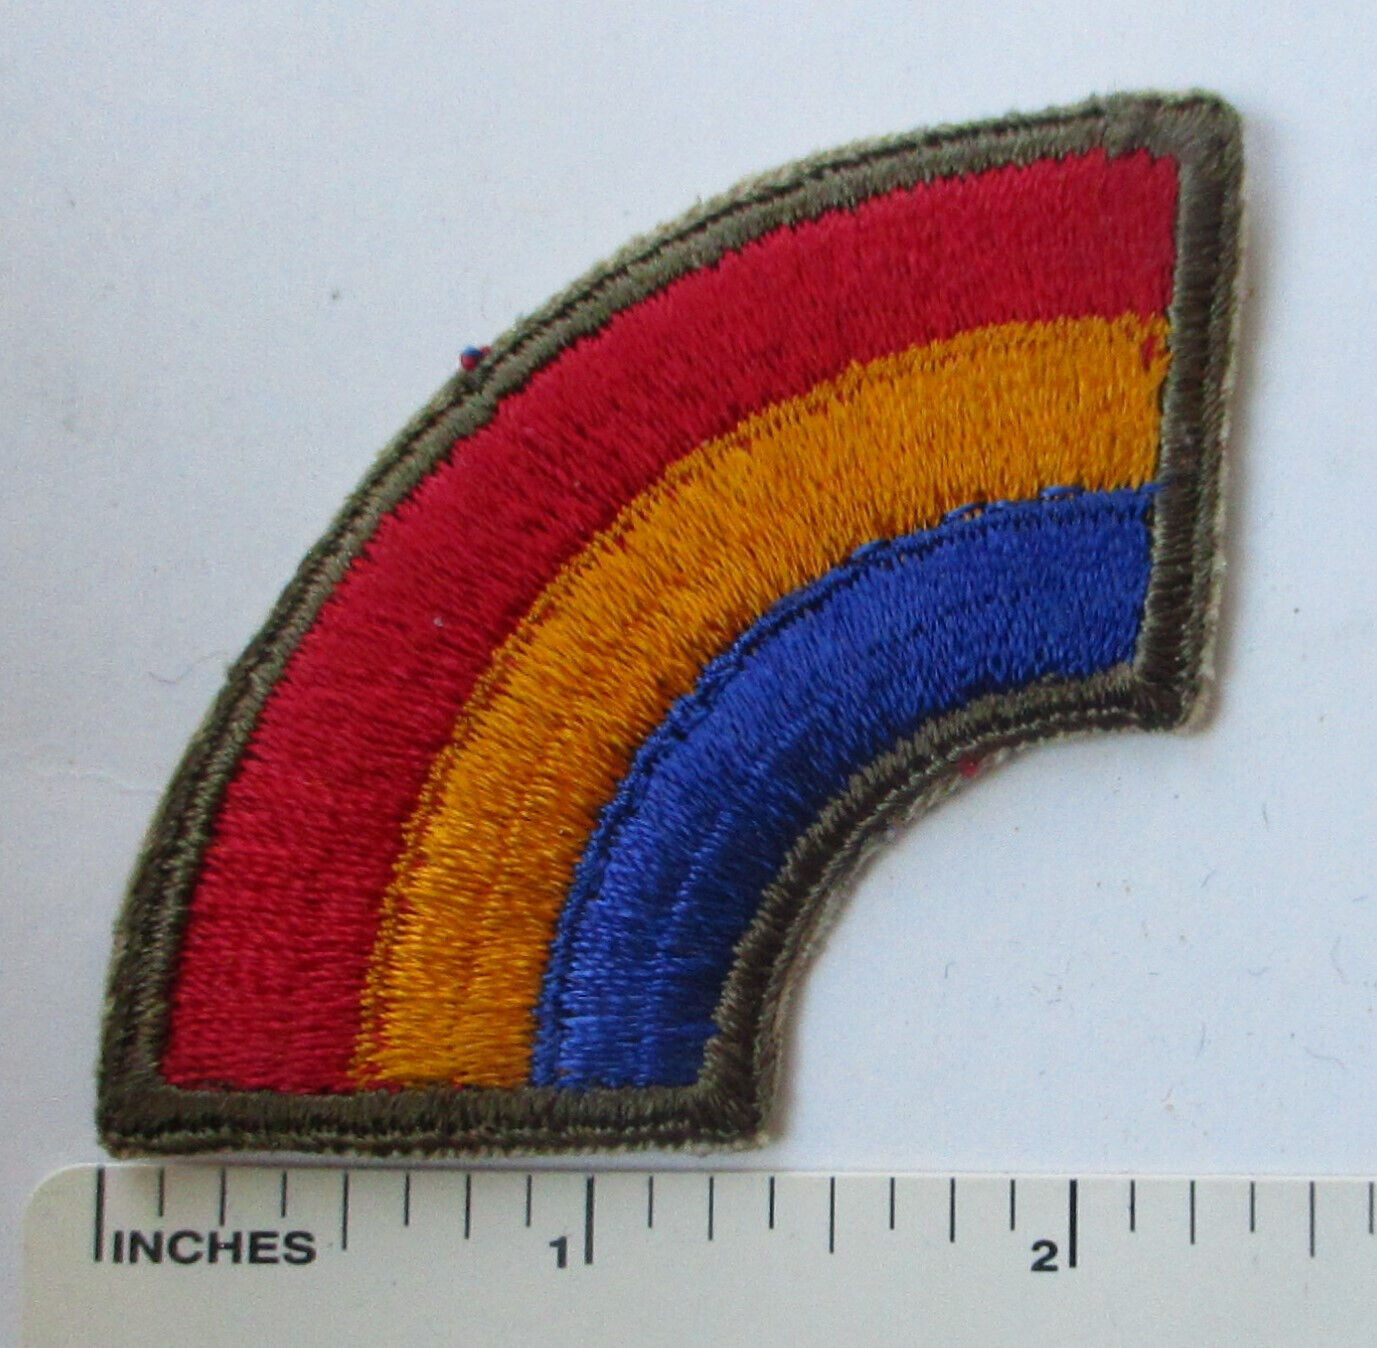 Original WW2 Vintage 42nd INFANTRY DIVISION US ARMY PATCH OD Border No Glow